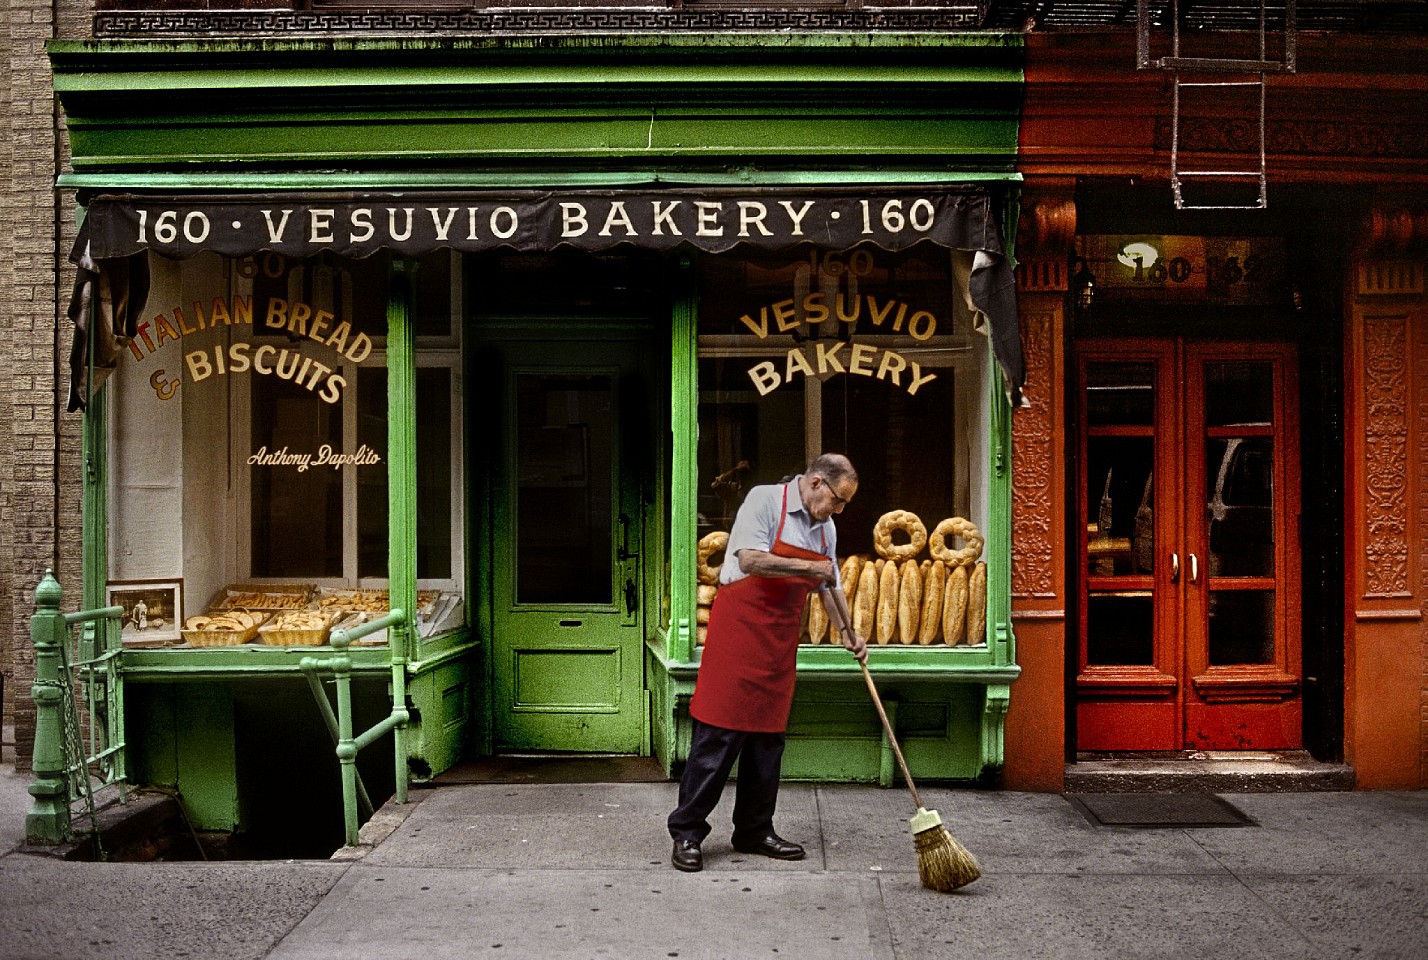 Steve McCurry, Man Sweeps Outside Vesuvio Bakery, 1996
FujiFlex Crystal Archive Print
Price/Size on request